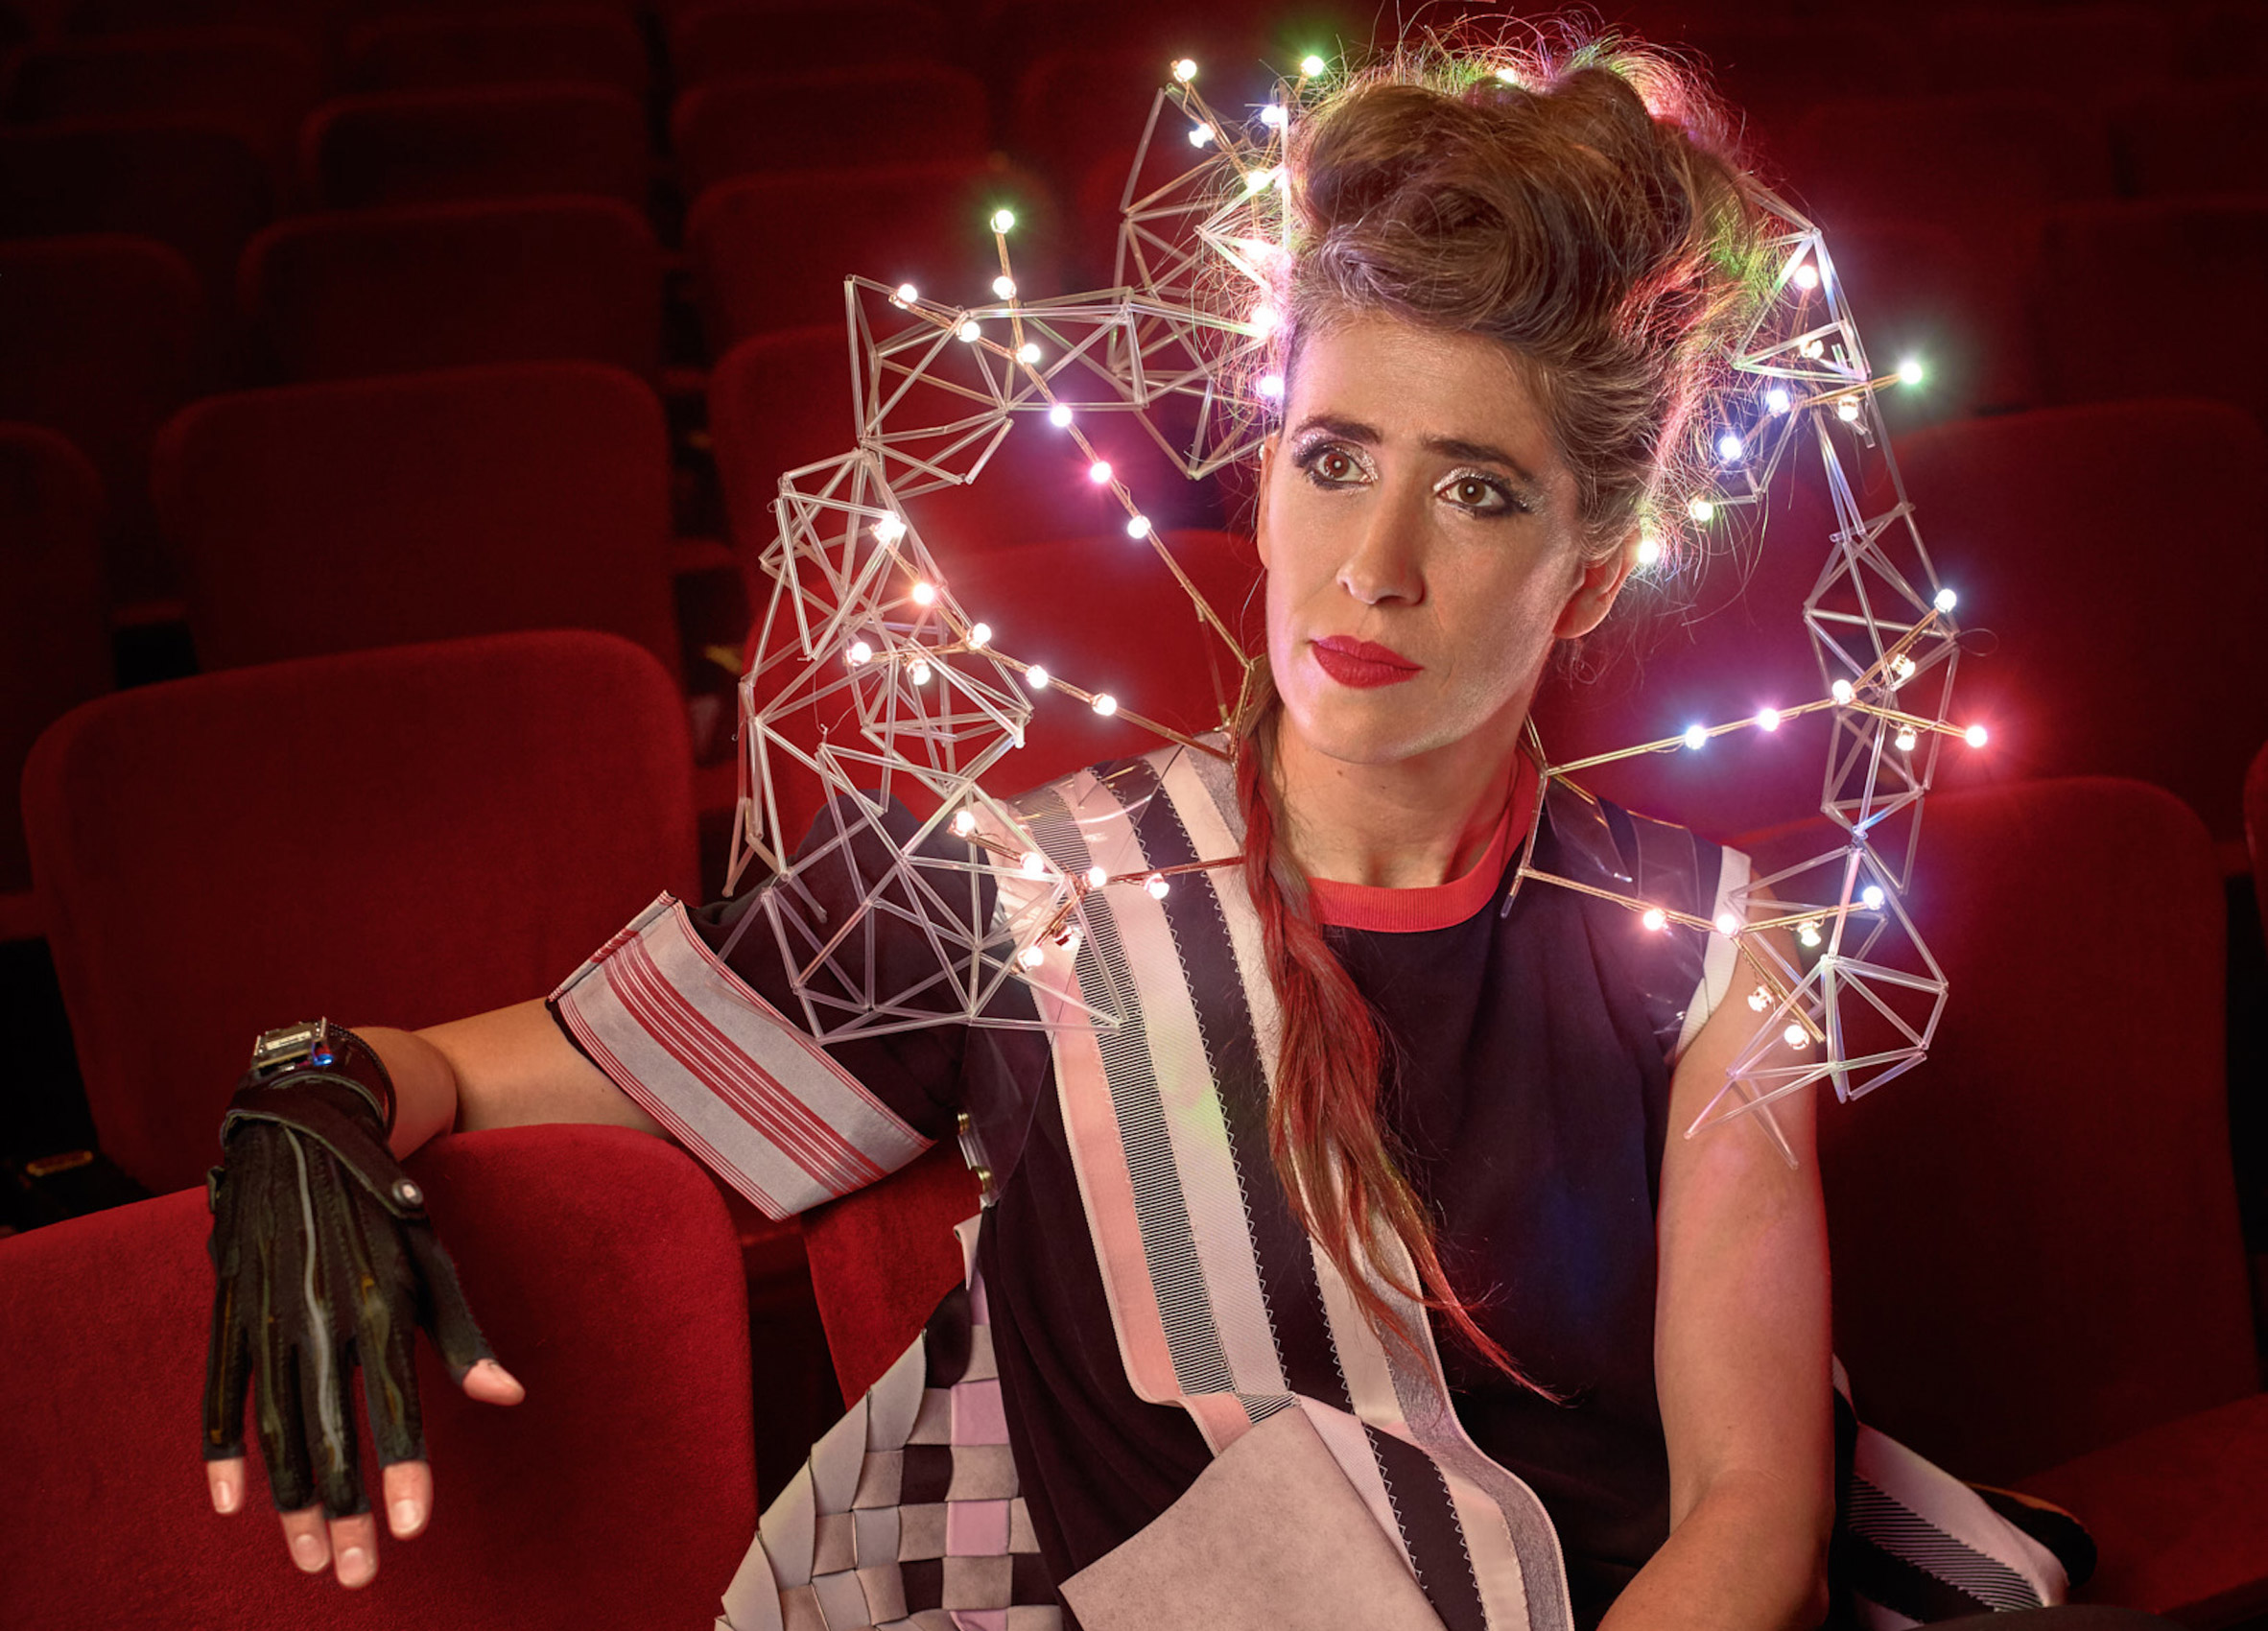 Live Interview With Musician Imogen Heap As Part Of Vdf